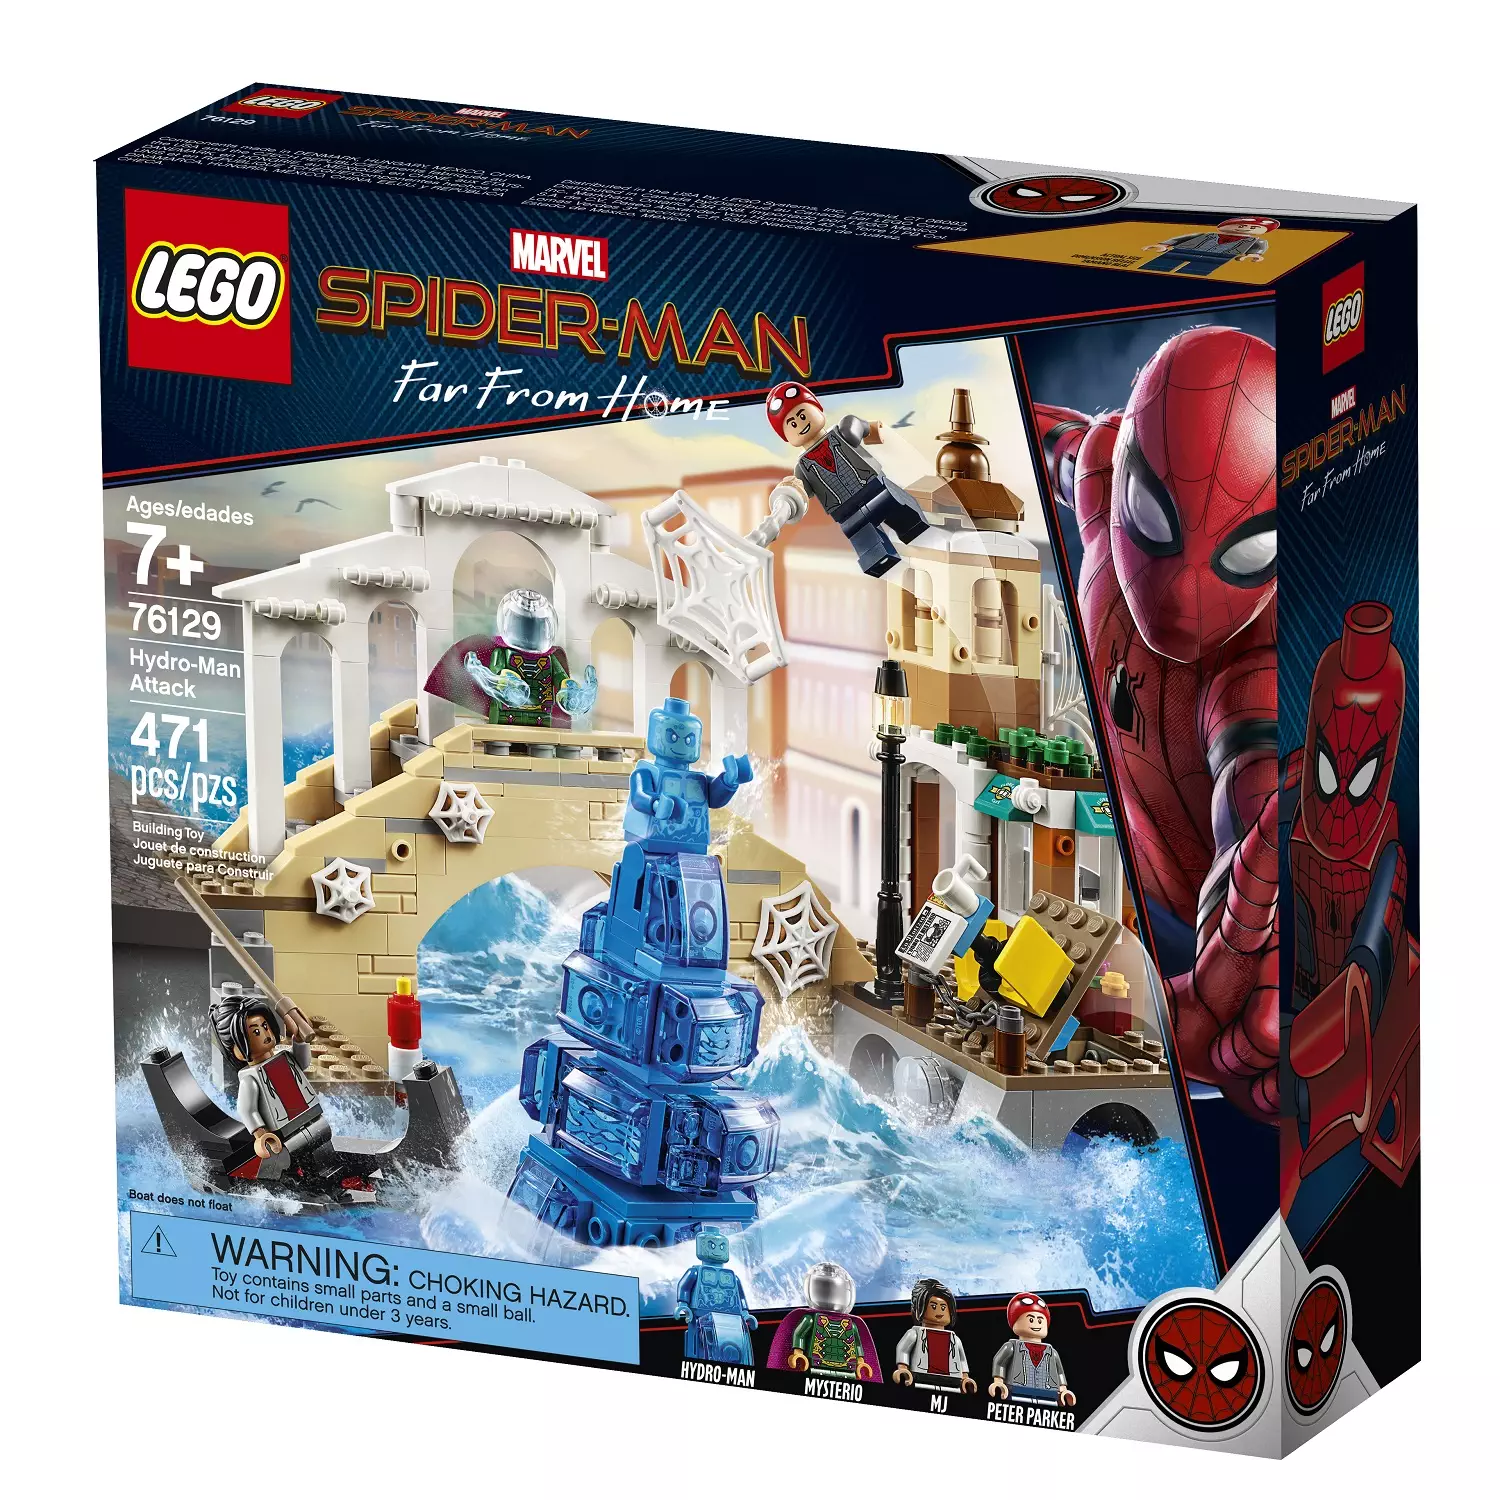 LEGO's Marvel Super Heroes Spider-Man: Far From Home sets revealed